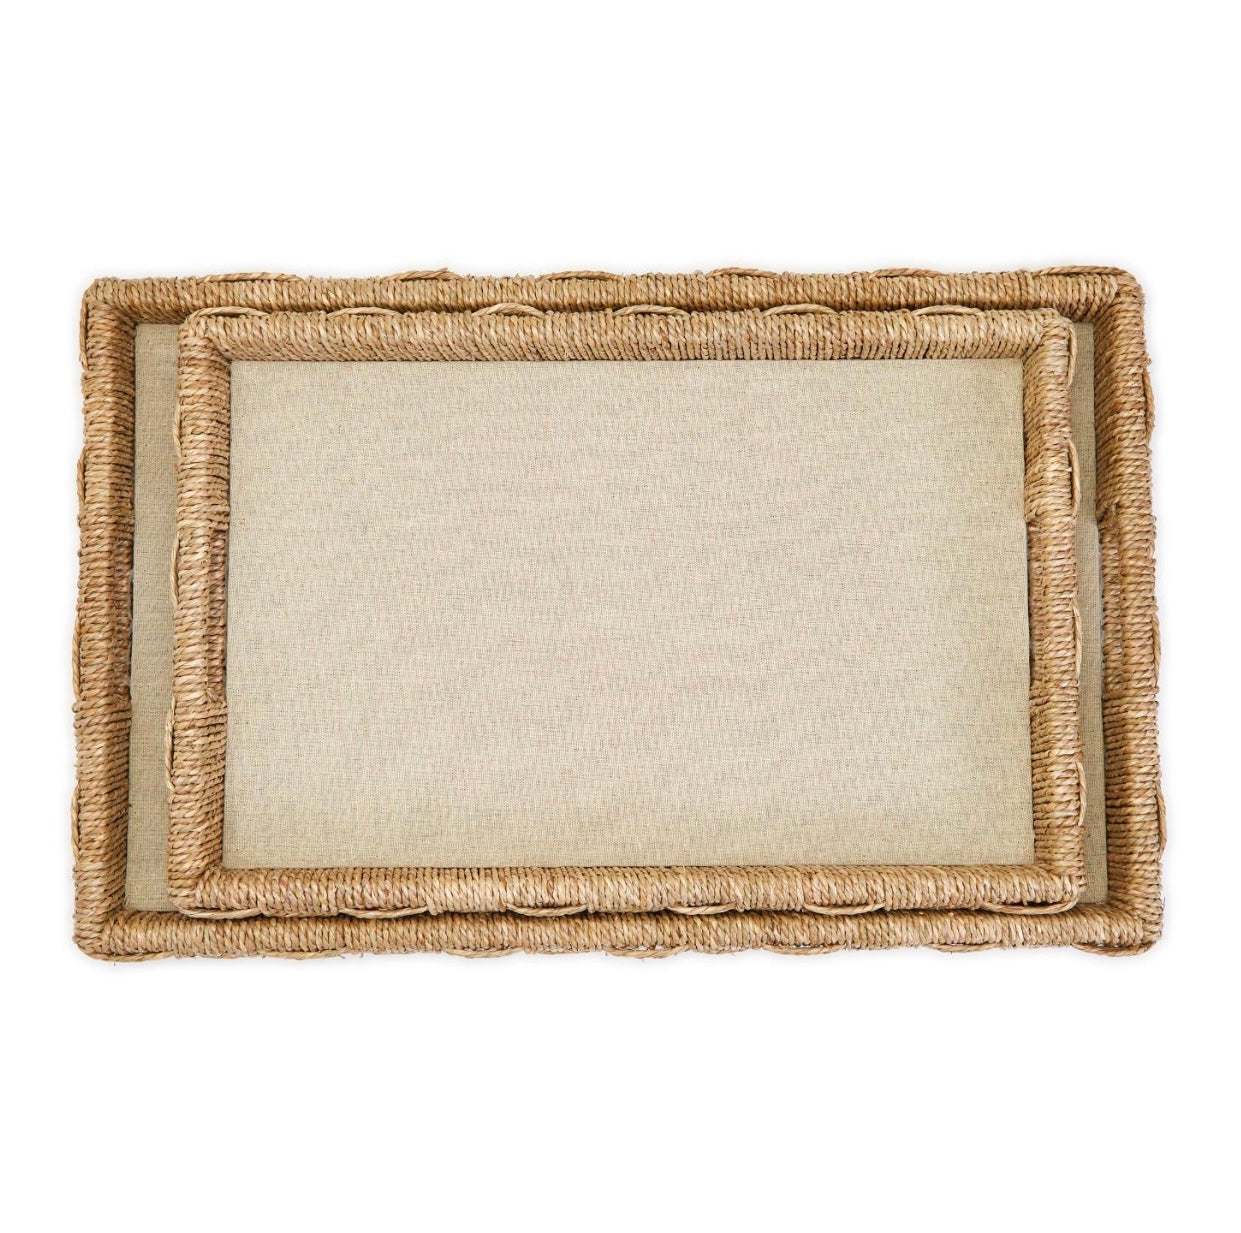 Sea Grass and Rattan Oversized Decorative Tray ~ 2 sizes